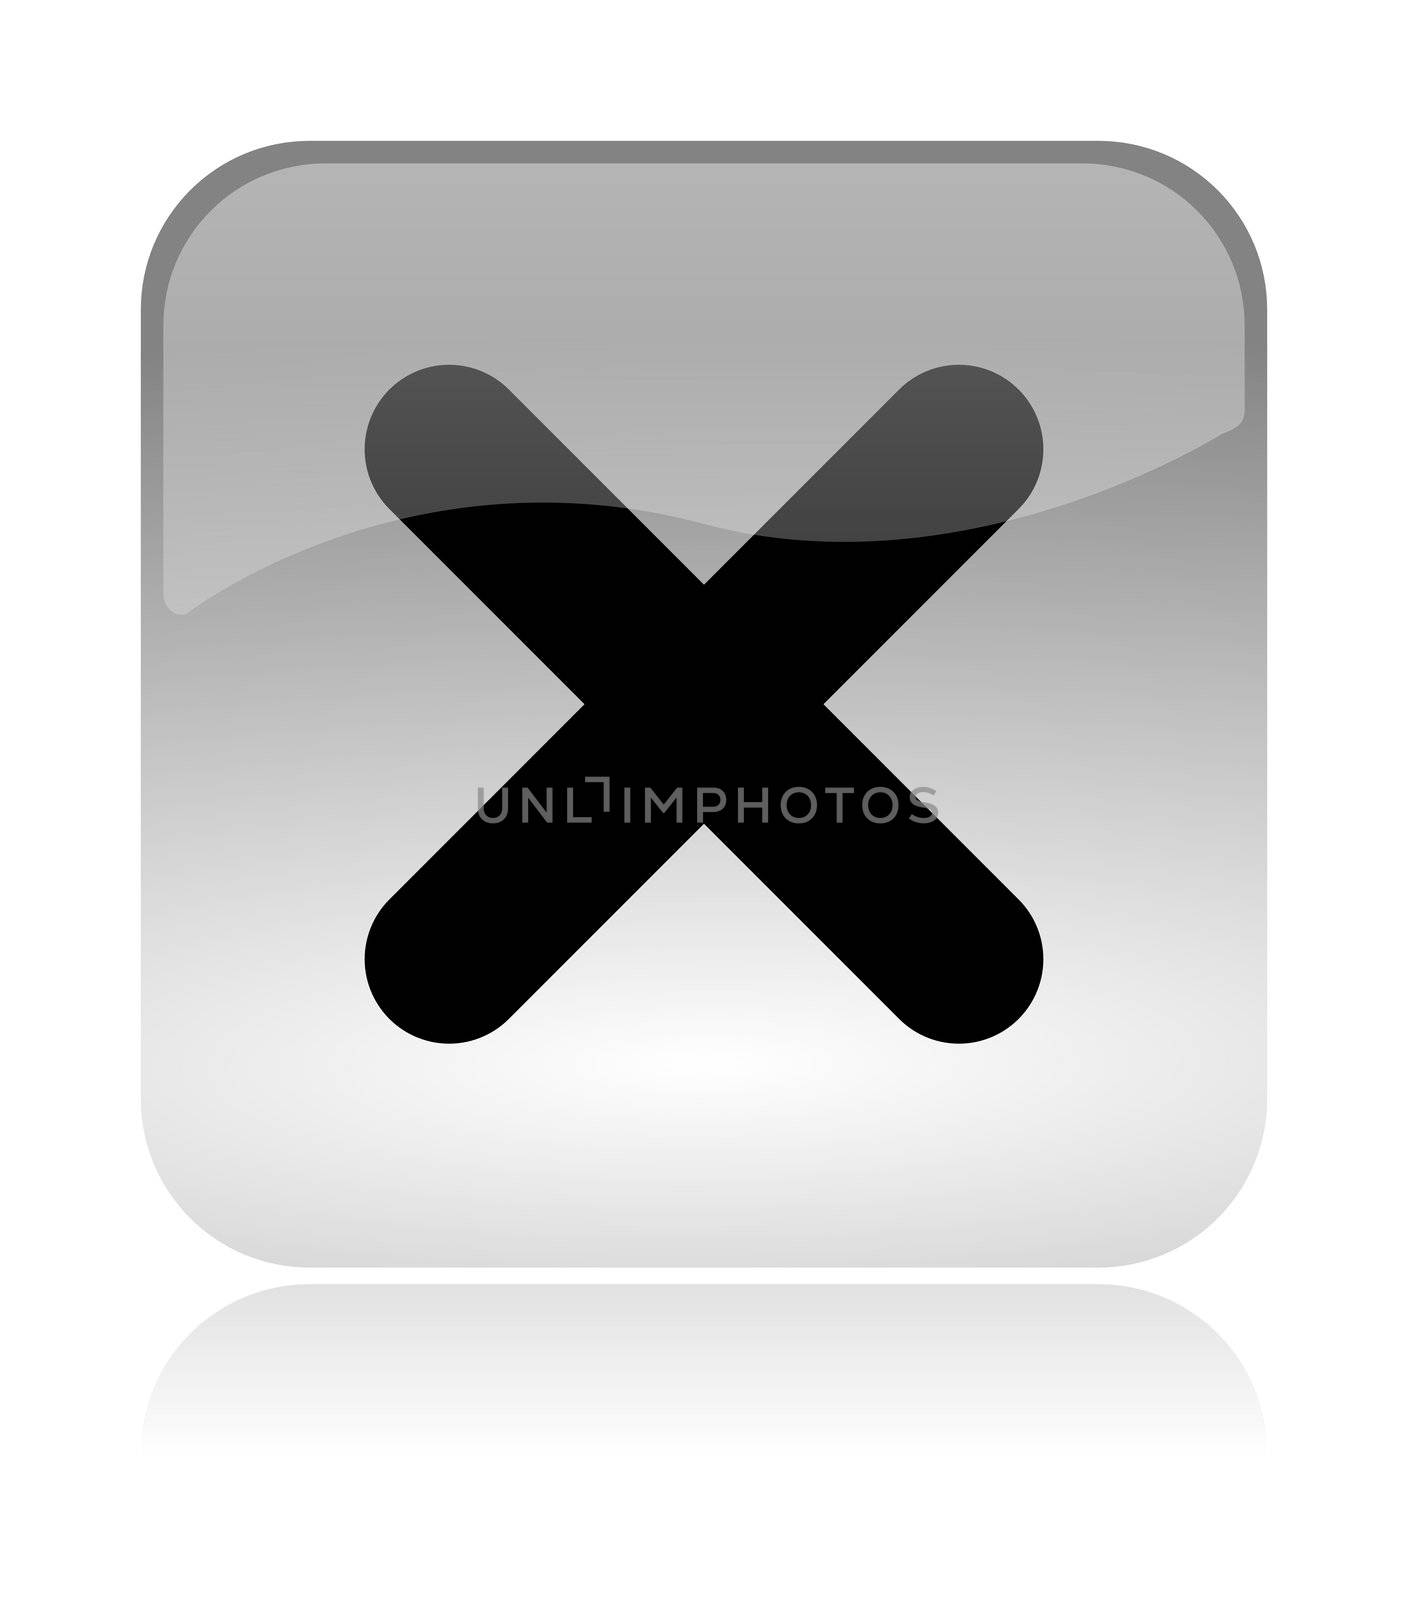 Cross, uncheck, web interface icon by make